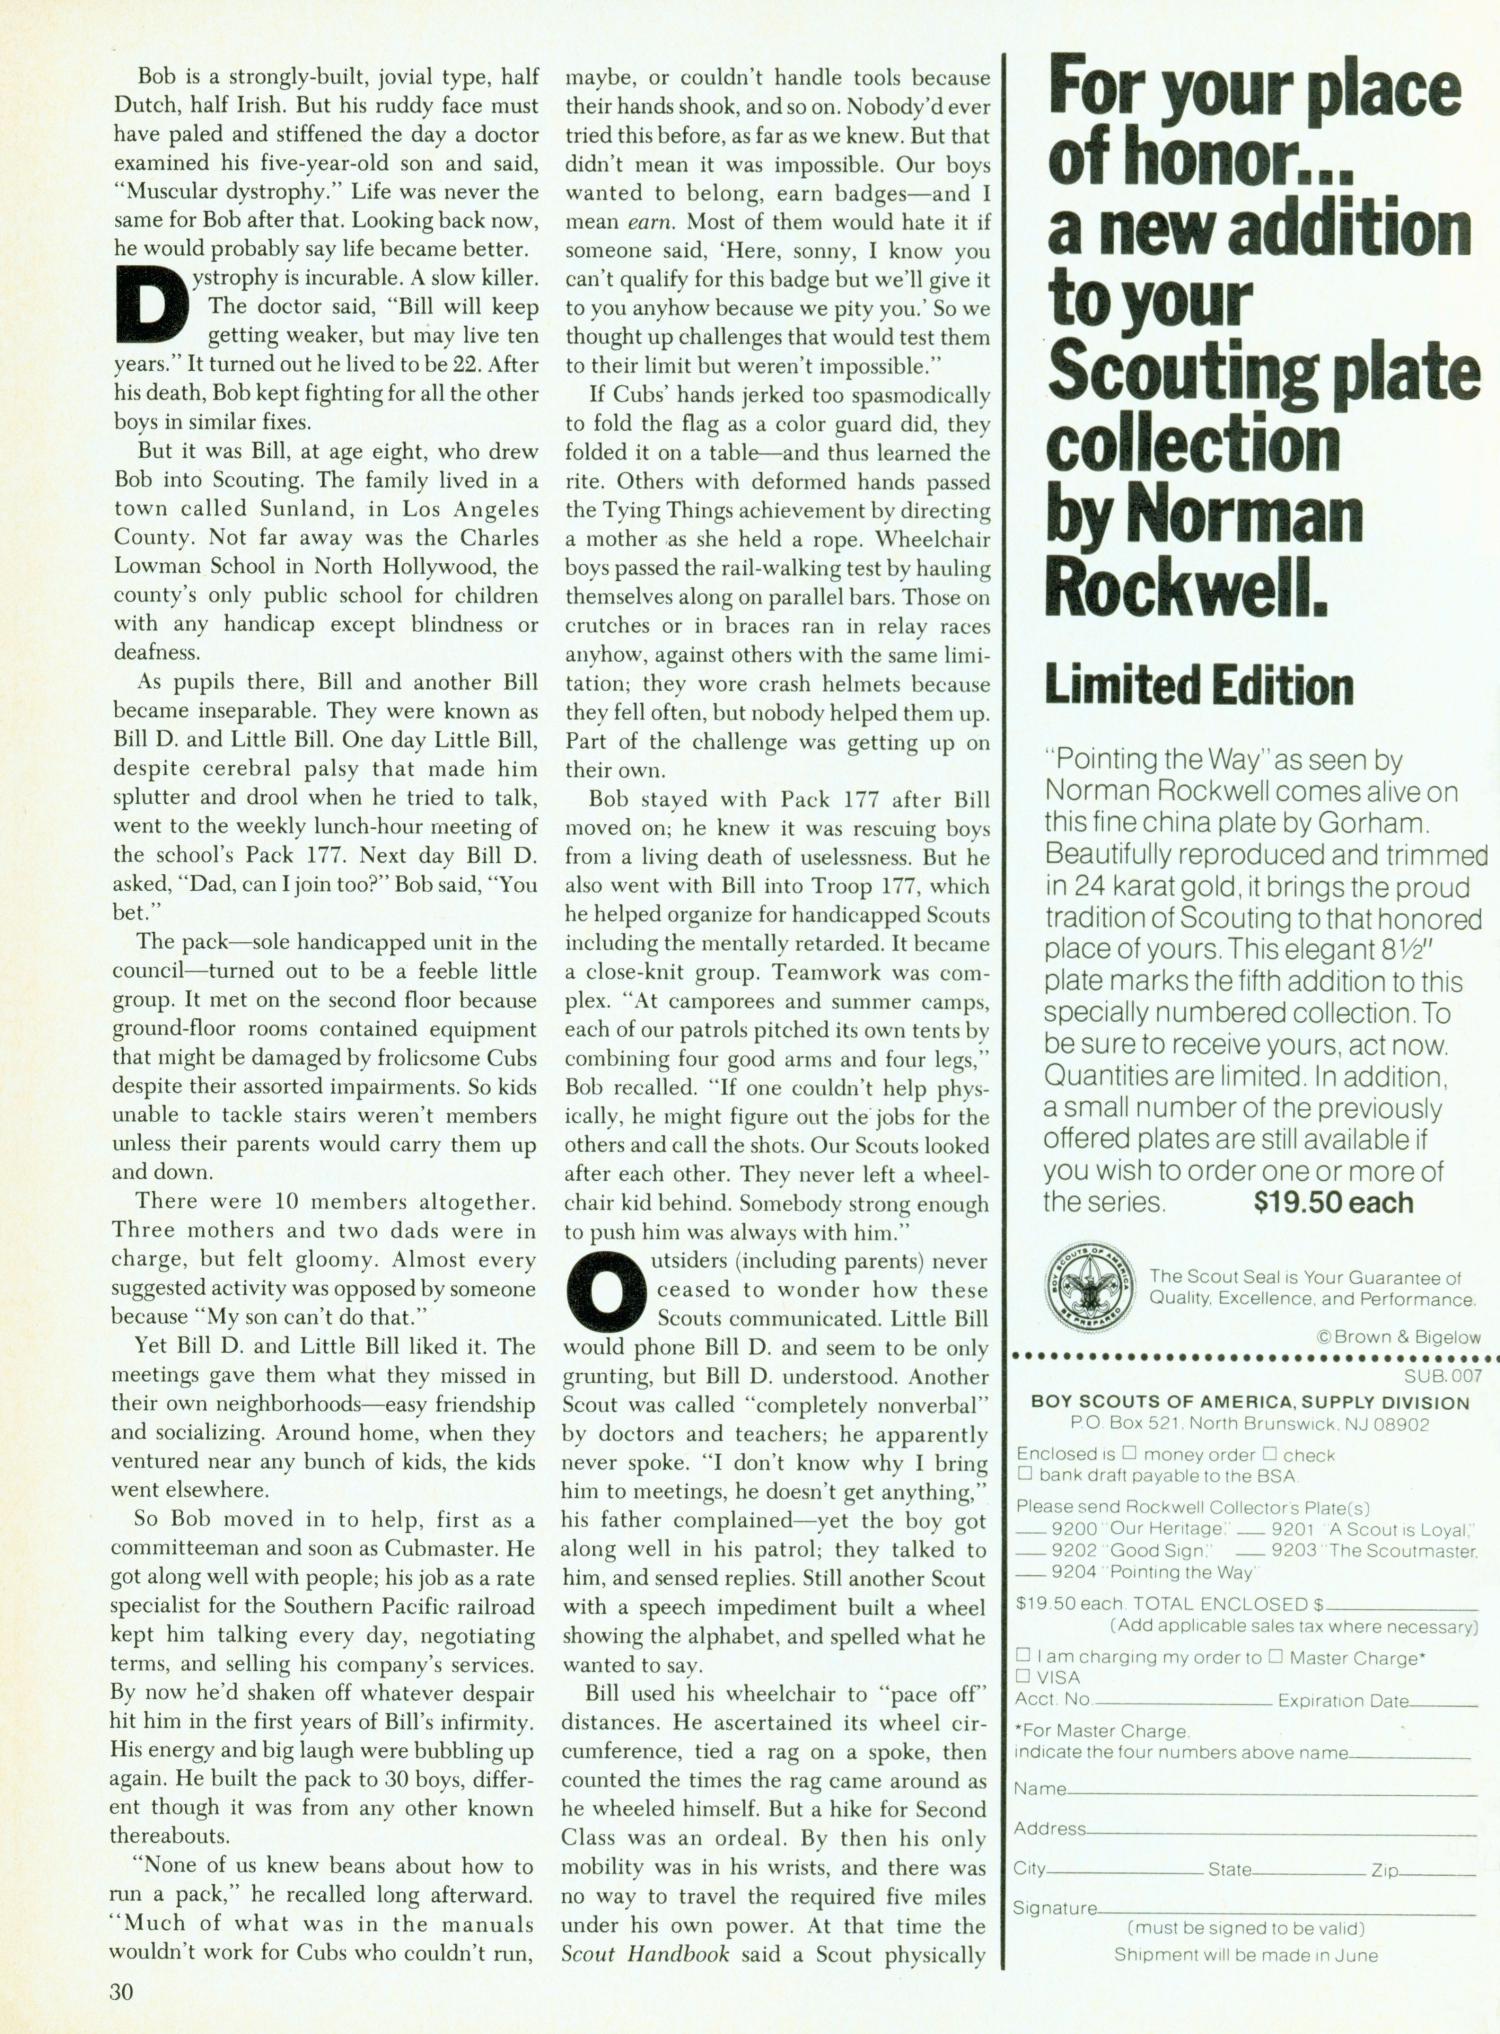 Scouting, Volume 66, Number 3, May-June 1978
                                                
                                                    30
                                                